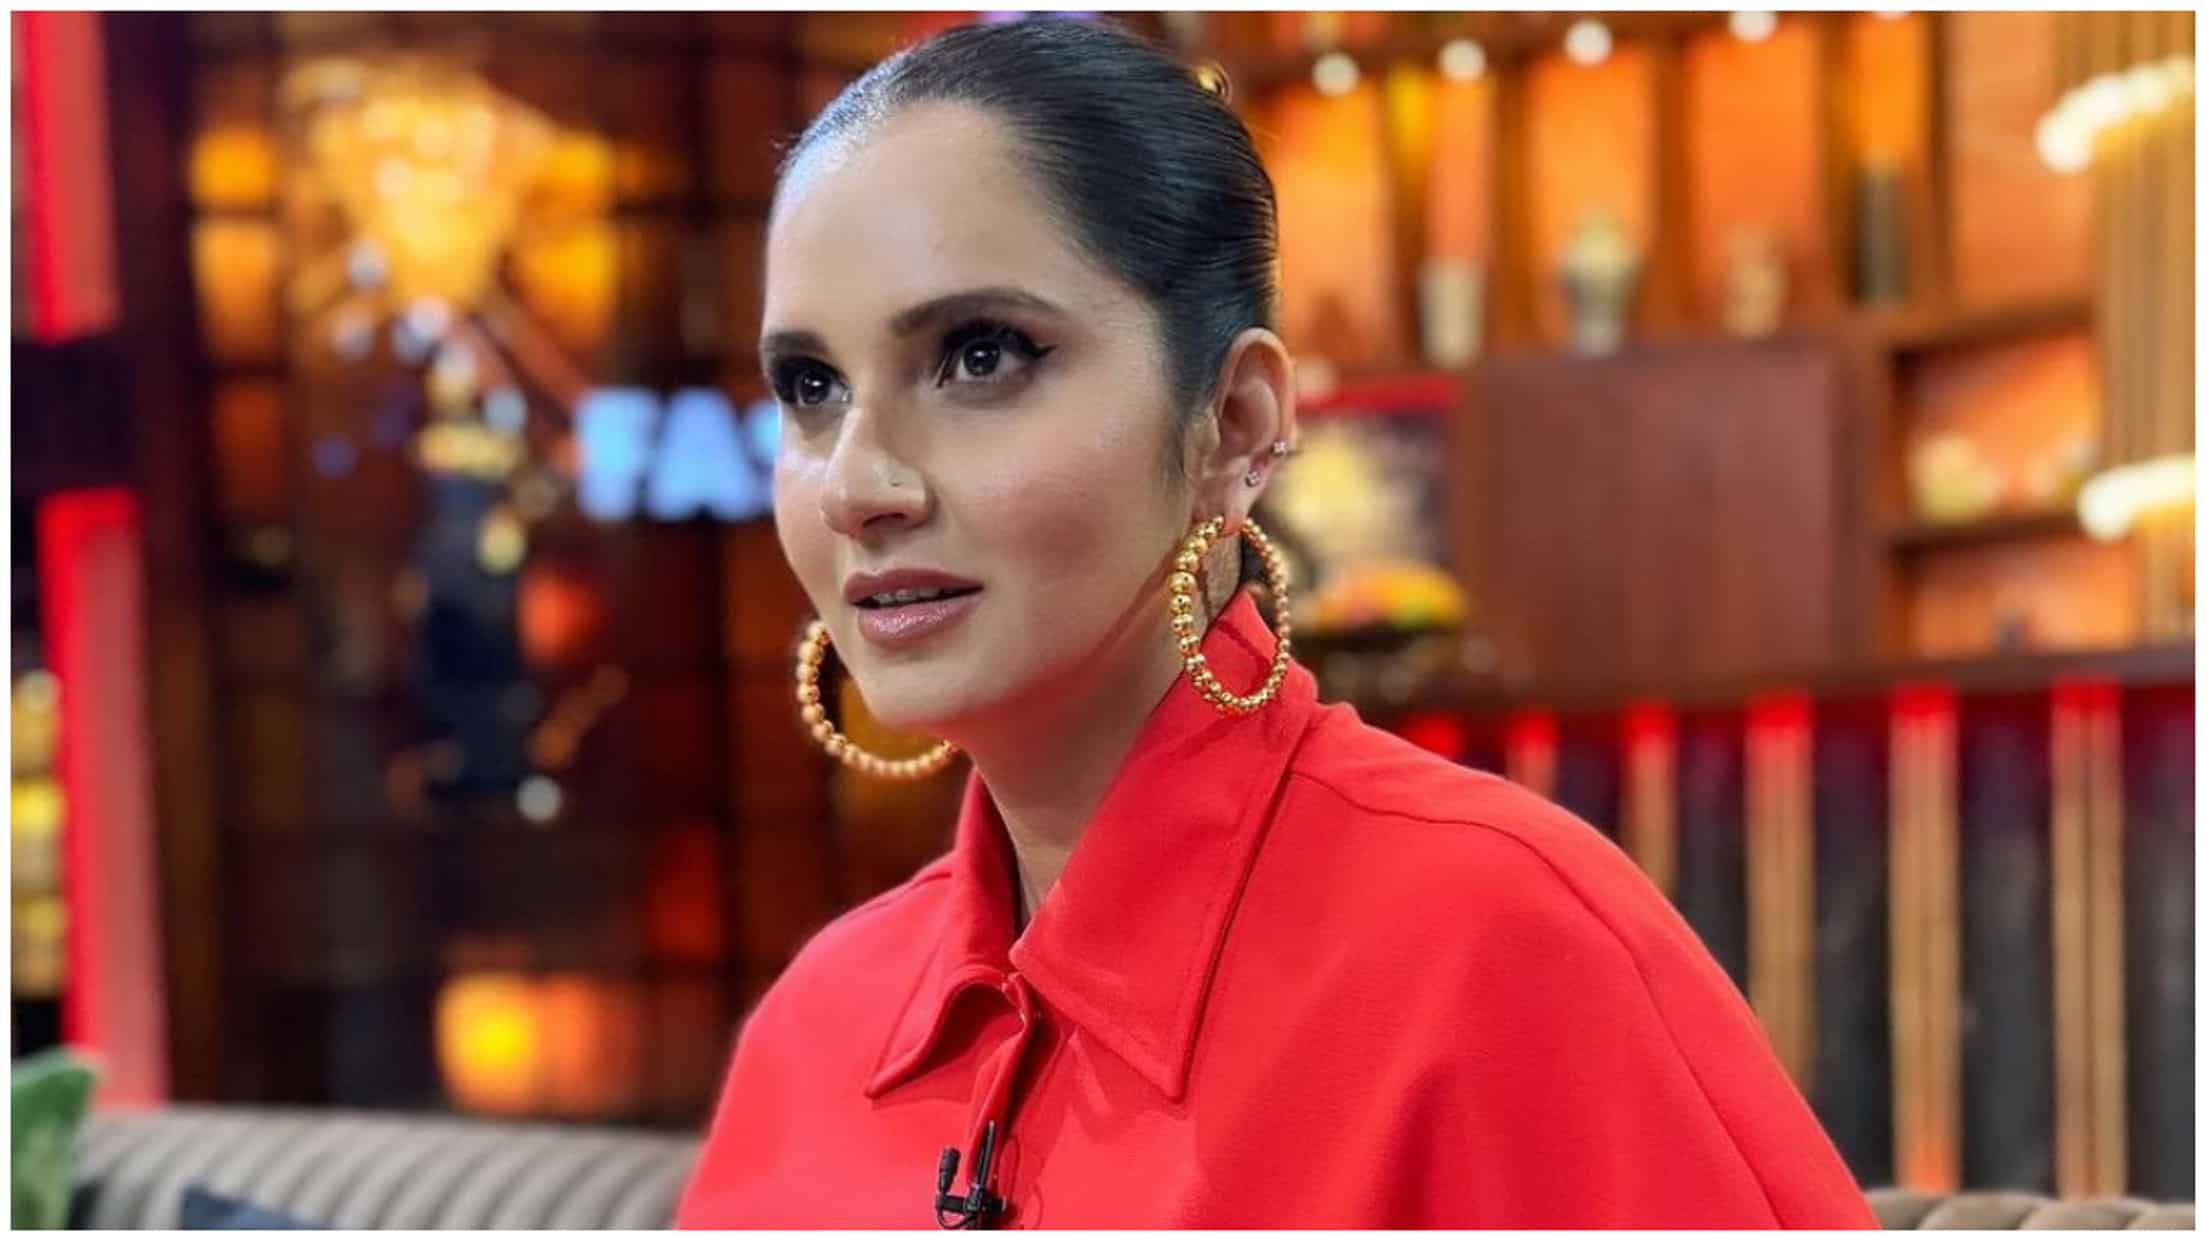 Did Sania Mirza accidentally confirm her presence on The Great Indian Kapil Show? Here’s the latest buzz